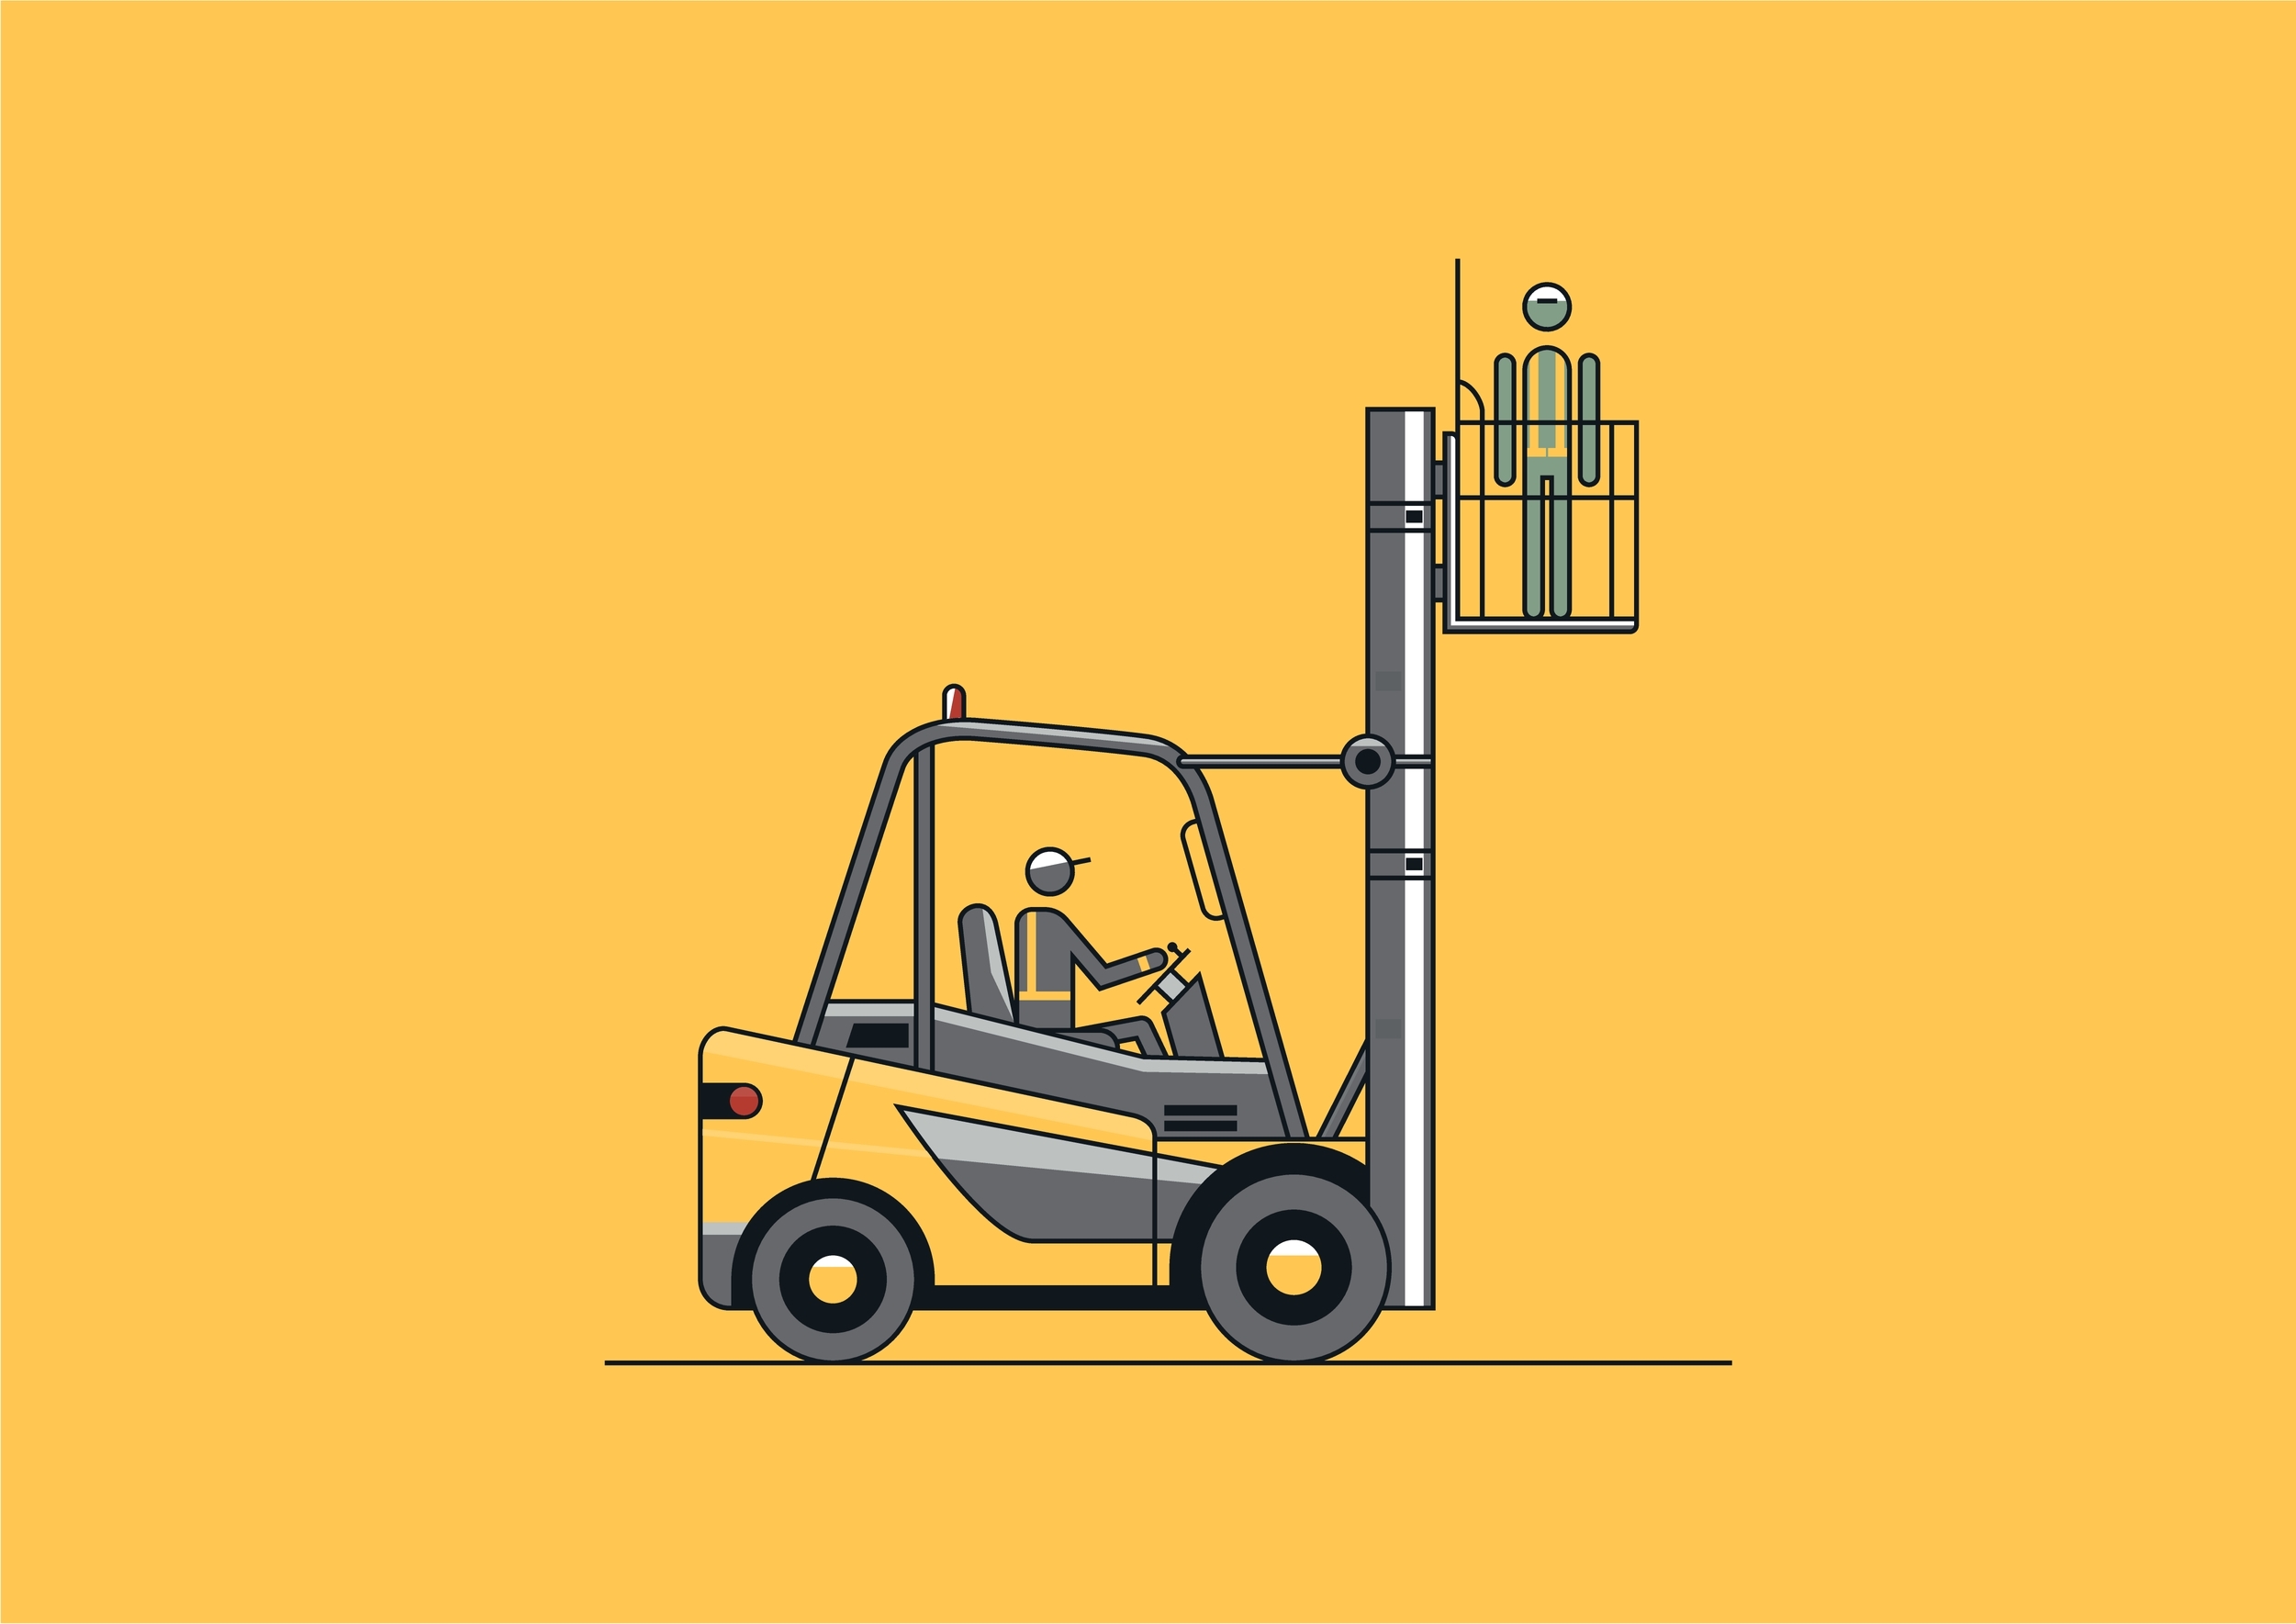 Forklift Safety Cage: When Should You Use One?